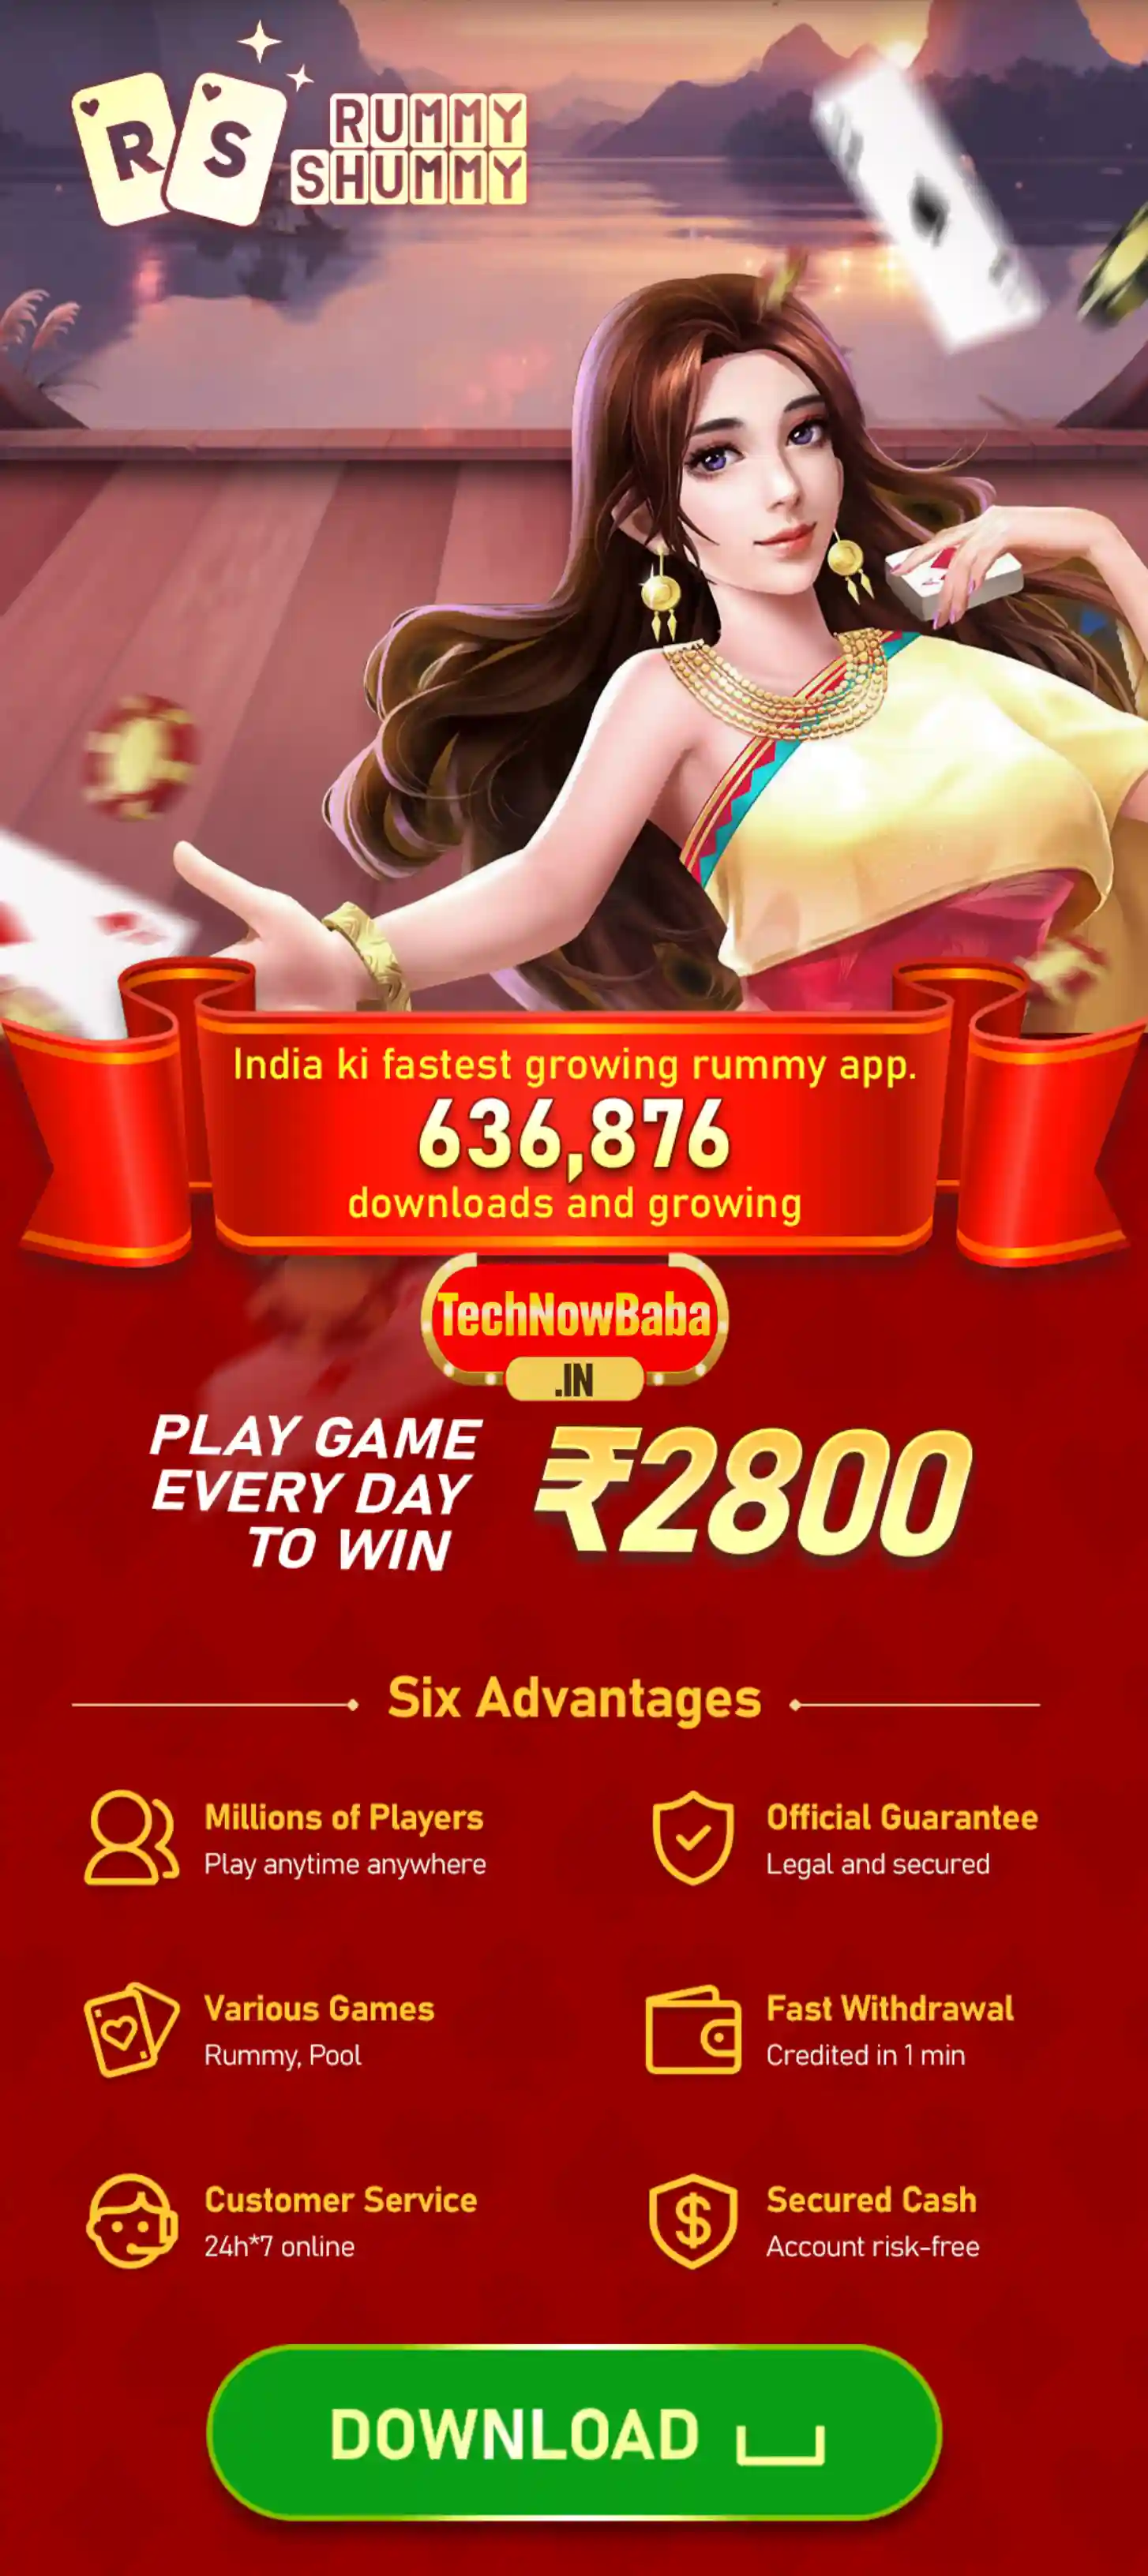 Rummy Shummy App Download Official